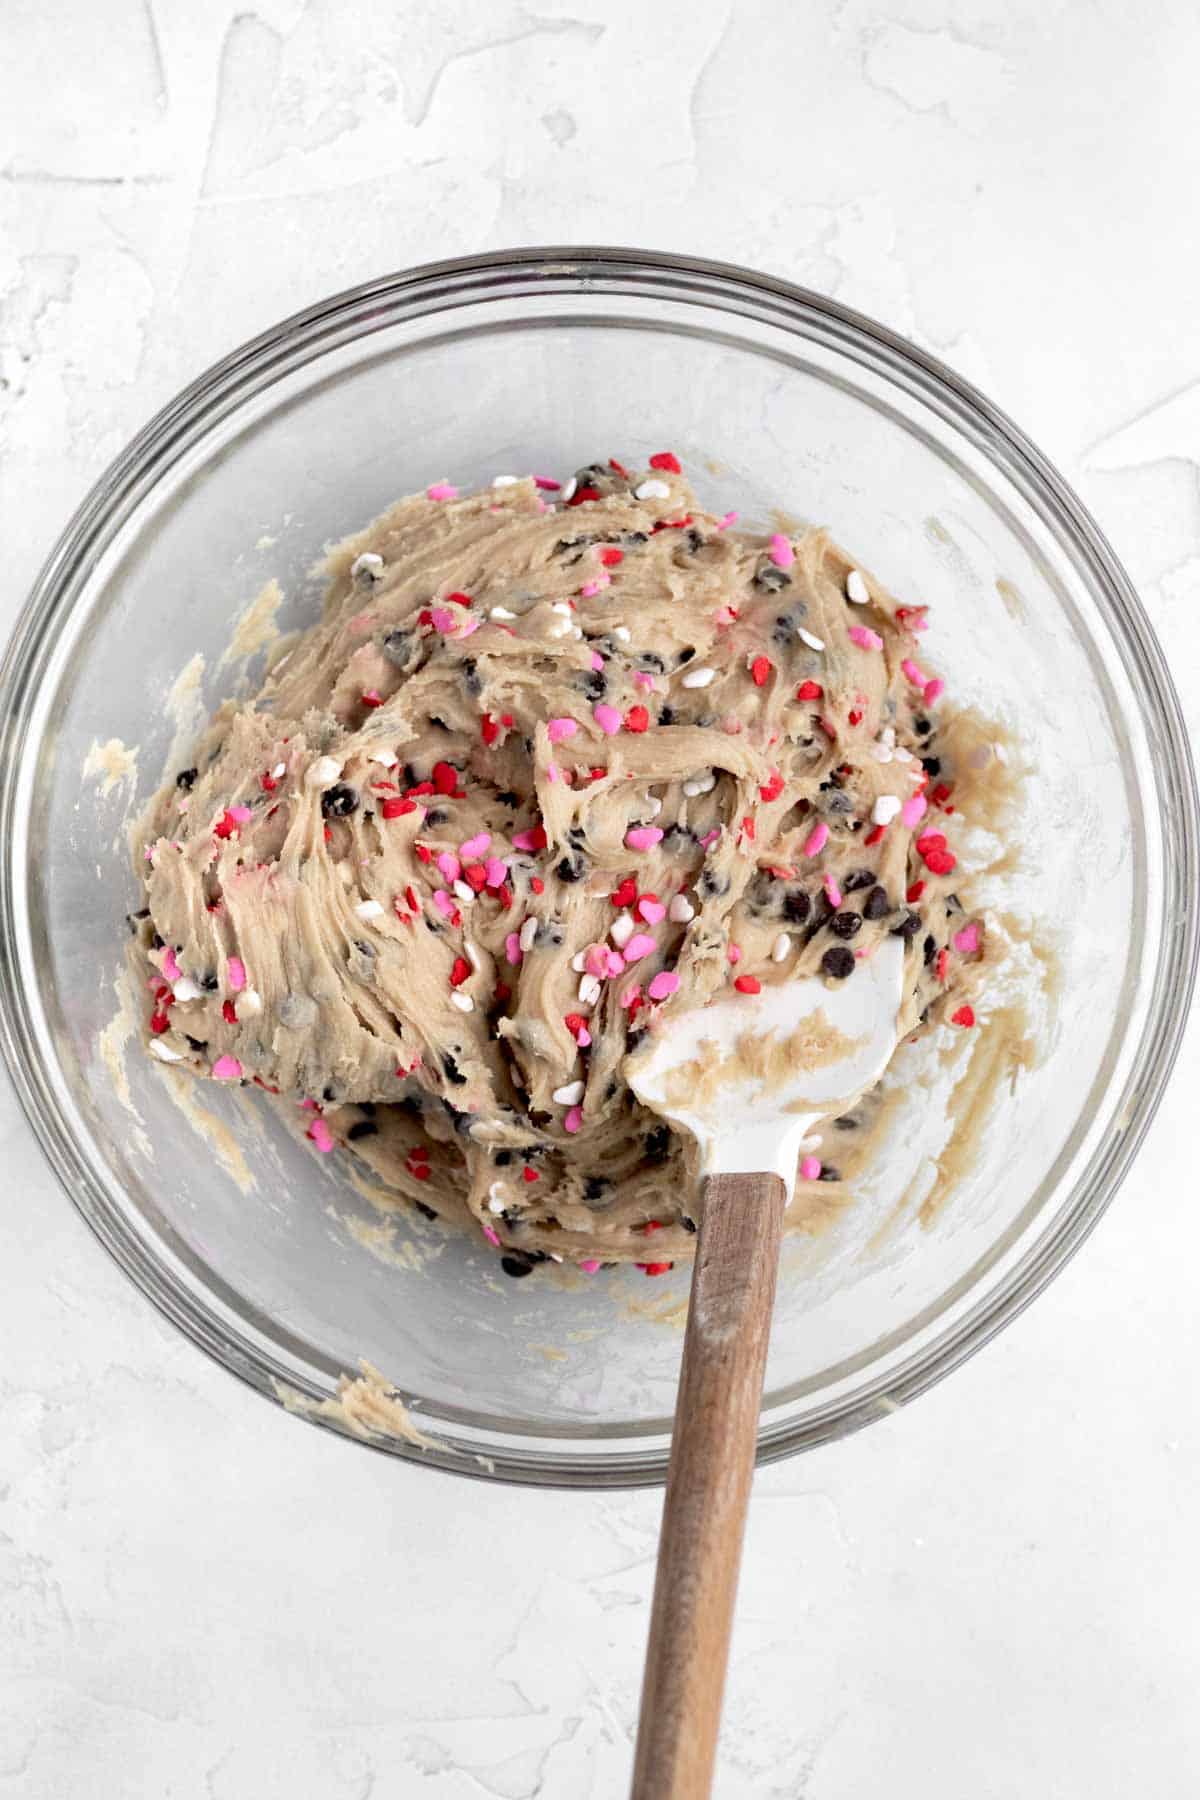 Folding in the pink, red and white sprinkles into the batter.